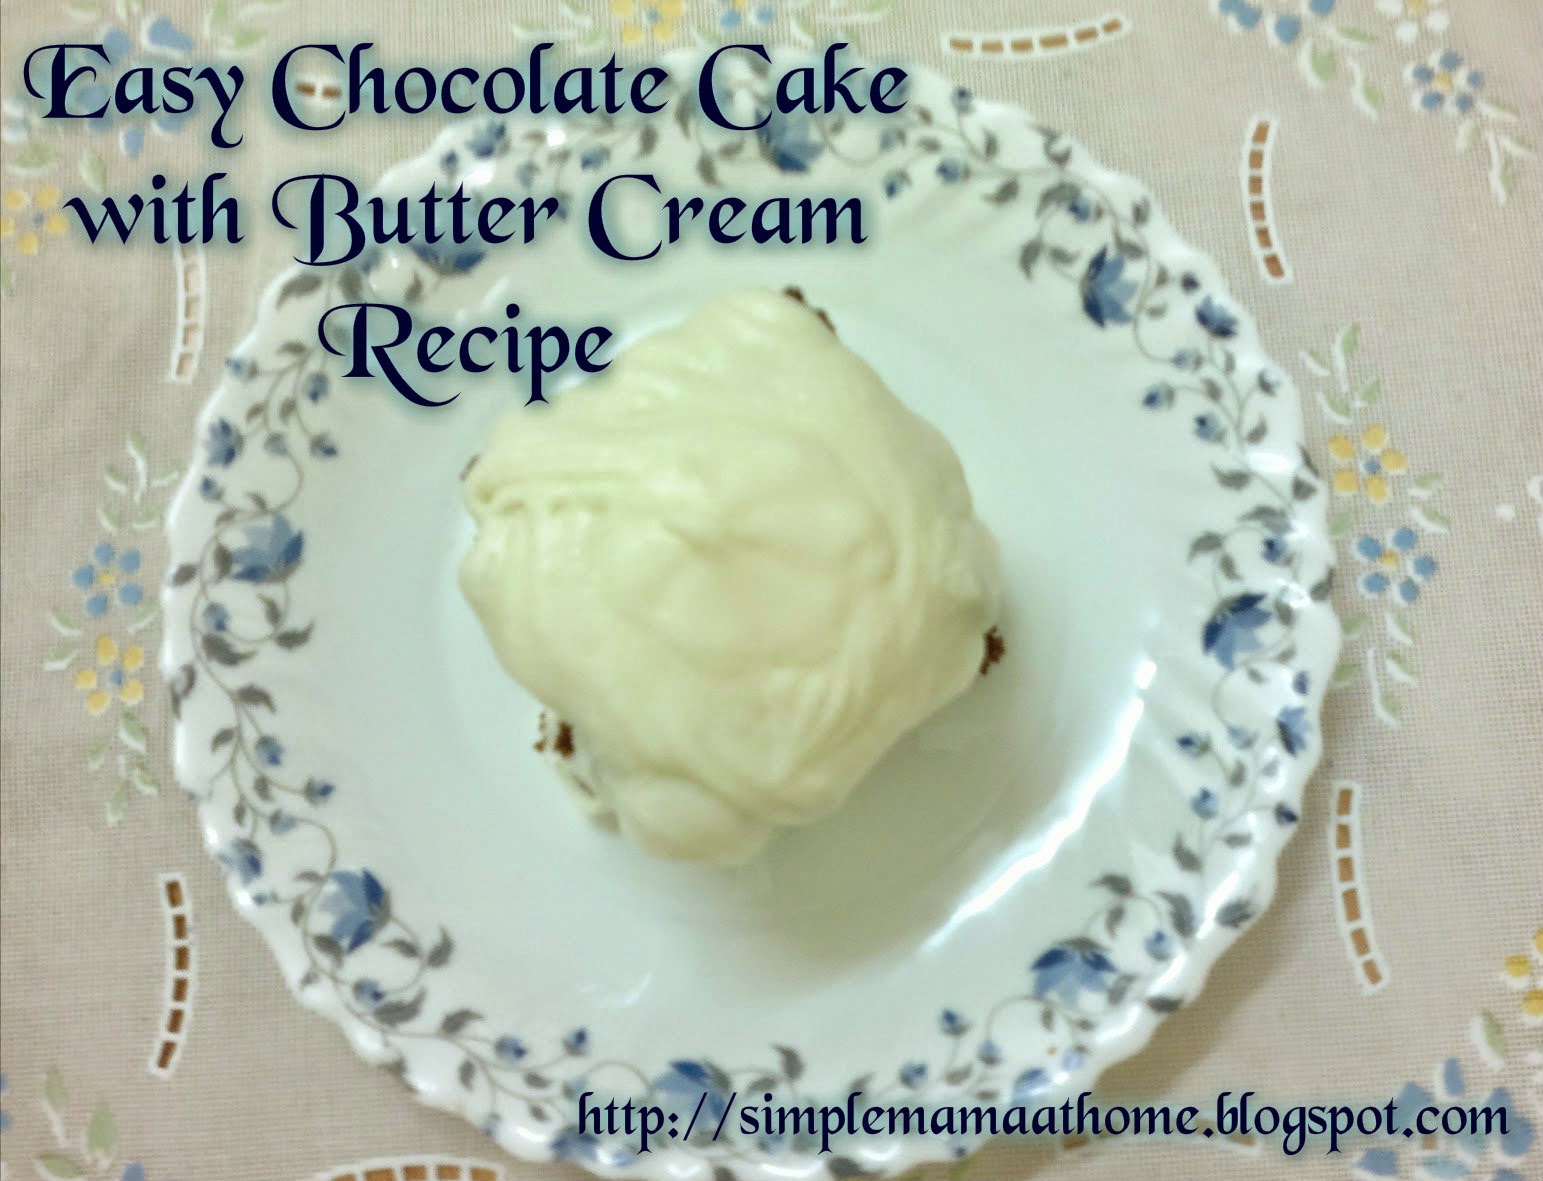 Easy Chocolate Cake with Butter Cream Recipe